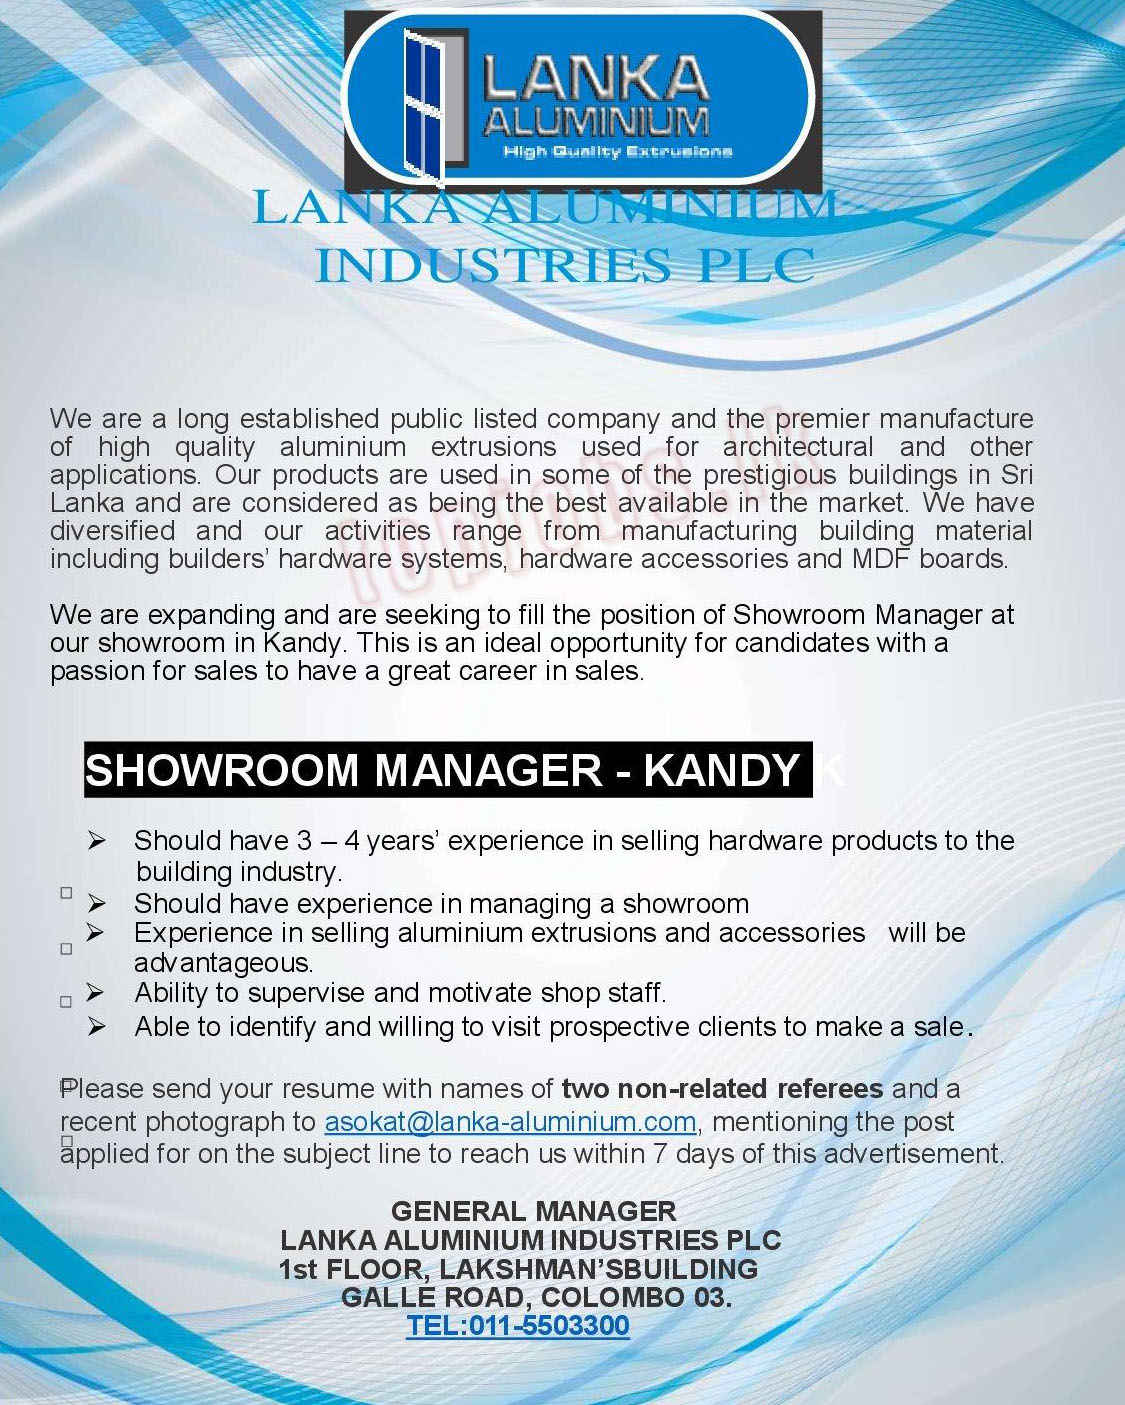 Showroom Manager - Kandy